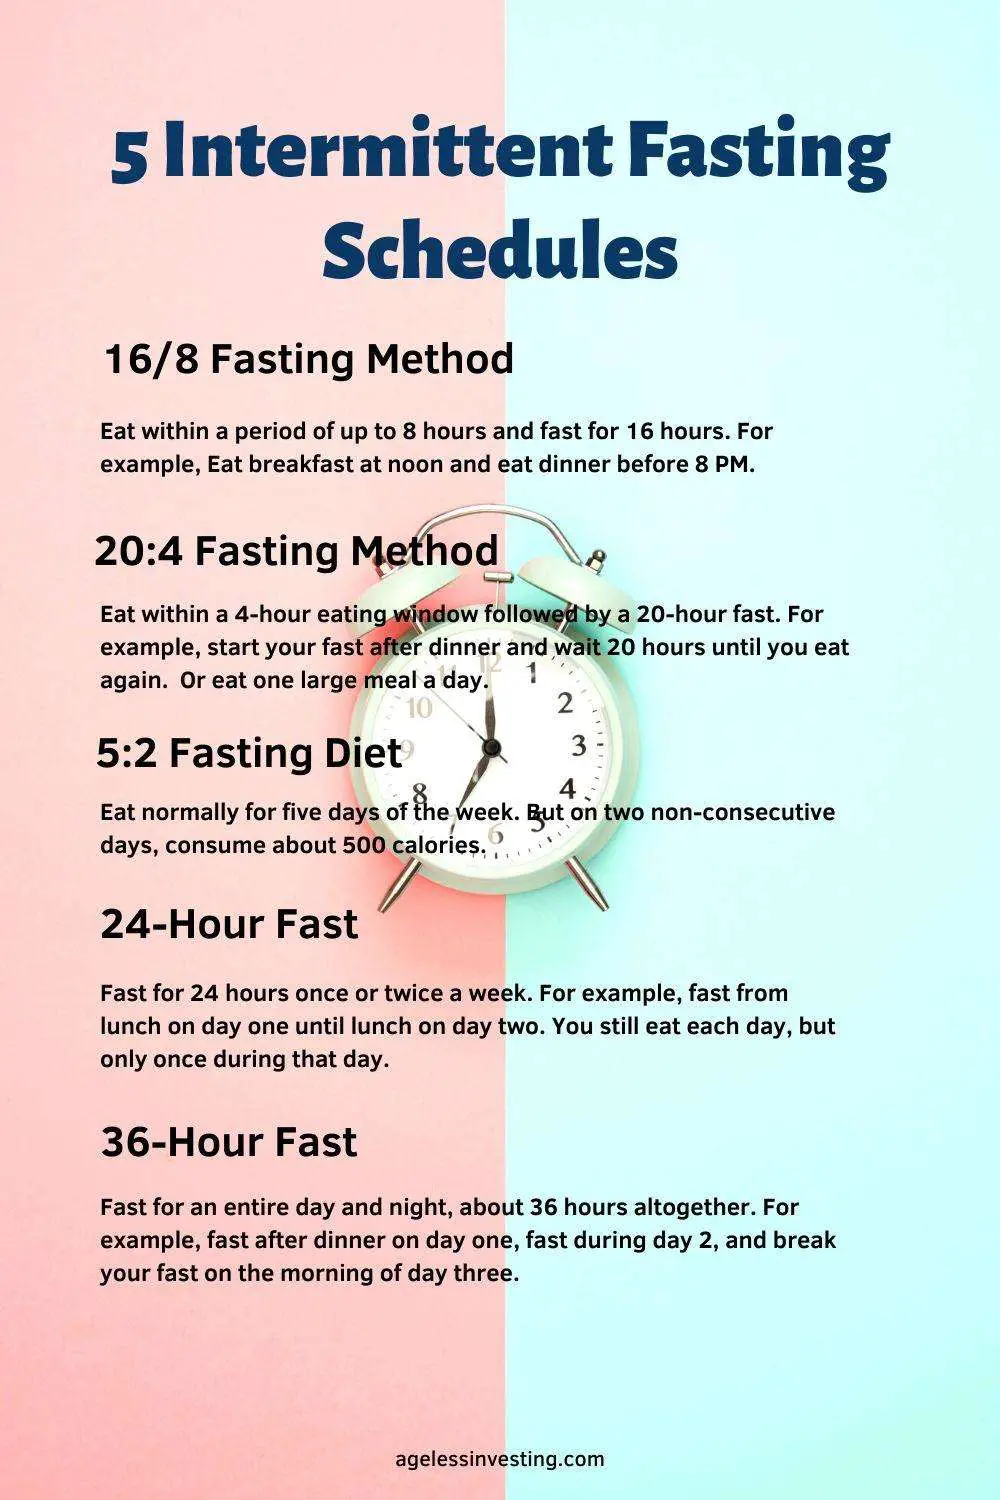 What Is Intermittent Fasting : 18 6 Intermittent Fasting Can Eating ...